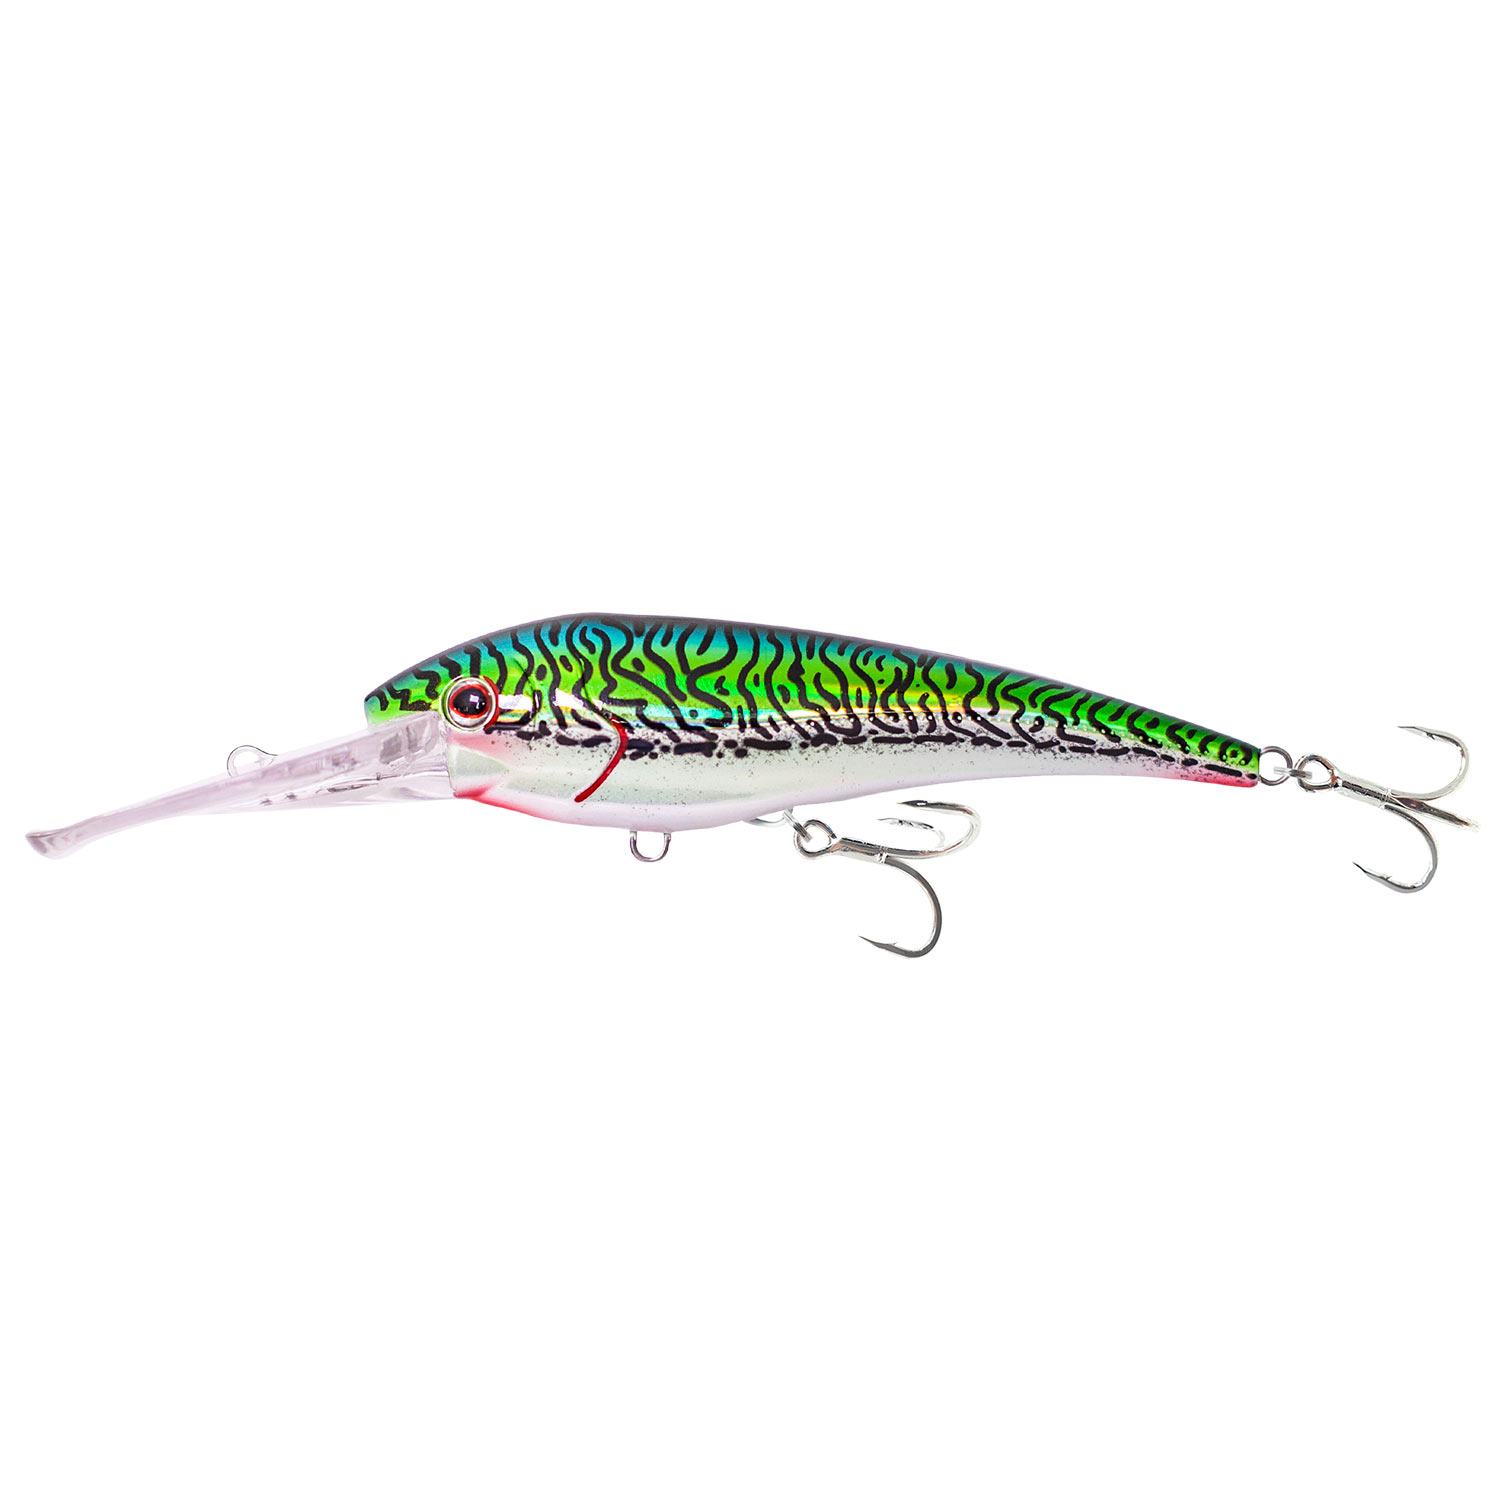 4 3/4" DTX Minnow 120 Floating Trolling Lures, 1 1/4 Ounces